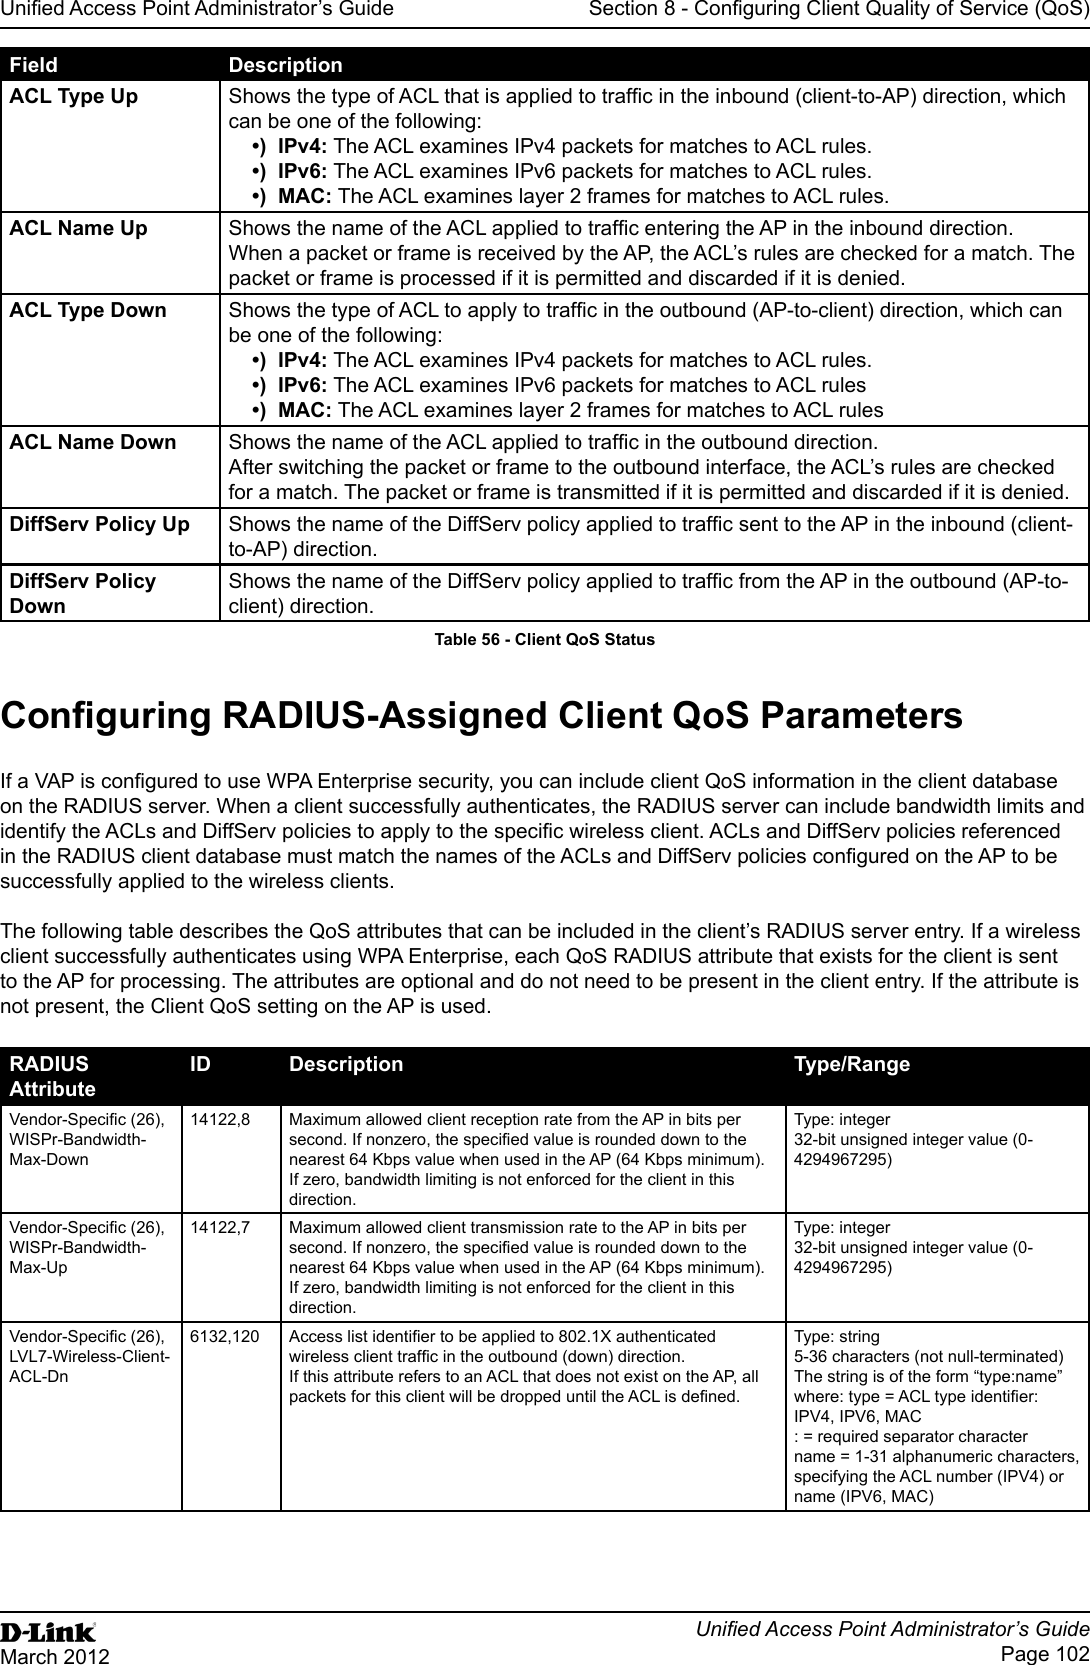 Unied Access Point Administrator’s GuideUnied Access Point Administrator’s GuidePage 102March 2012Section 8 - Conguring Client Quality of Service (QoS)Field DescriptionACL Type Up Shows the type of ACL that is applied to trafc in the inbound (client-to-AP) direction, which can be one of the following: •)  IPv4: The ACL examines IPv4 packets for matches to ACL rules.•)  IPv6: The ACL examines IPv6 packets for matches to ACL rules.•)  MAC: The ACL examines layer 2 frames for matches to ACL rules.ACL Name Up Shows the name of the ACL applied to trafc entering the AP in the inbound direction. When a packet or frame is received by the AP, the ACL’s rules are checked for a match. The packet or frame is processed if it is permitted and discarded if it is denied.ACL Type Down Shows the type of ACL to apply to trafc in the outbound (AP-to-client) direction, which can be one of the following: •)  IPv4: The ACL examines IPv4 packets for matches to ACL rules.•)  IPv6: The ACL examines IPv6 packets for matches to ACL rules•)  MAC: The ACL examines layer 2 frames for matches to ACL rulesACL Name Down Shows the name of the ACL applied to trafc in the outbound direction. After switching the packet or frame to the outbound interface, the ACL’s rules are checked for a match. The packet or frame is transmitted if it is permitted and discarded if it is denied.DiffServ Policy Up Shows the name of the DiffServ policy applied to trafc sent to the AP in the inbound (client-to-AP) direction.DiffServ Policy DownShows the name of the DiffServ policy applied to trafc from the AP in the outbound (AP-to-client) direction.Table 56 - Client QoS StatusConguring RADIUS-Assigned Client QoS ParametersIf a VAP is congured to use WPA Enterprise security, you can include client QoS information in the client database on the RADIUS server. When a client successfully authenticates, the RADIUS server can include bandwidth limits and identify the ACLs and DiffServ policies to apply to the specic wireless client. ACLs and DiffServ policies referenced in the RADIUS client database must match the names of the ACLs and DiffServ policies congured on the AP to be successfully applied to the wireless clients.The following table describes the QoS attributes that can be included in the client’s RADIUS server entry. If a wireless client successfully authenticates using WPA Enterprise, each QoS RADIUS attribute that exists for the client is sent to the AP for processing. The attributes are optional and do not need to be present in the client entry. If the attribute is not present, the Client QoS setting on the AP is used.RADIUS AttributeID Description Type/RangeVendor-Specic (26), WISPr-Bandwidth-Max-Down14122,8 Maximum allowed client reception rate from the AP in bits per second. If nonzero, the specied value is rounded down to the nearest 64 Kbps value when used in the AP (64 Kbps minimum). If zero, bandwidth limiting is not enforced for the client in this direction.Type: integer32-bit unsigned integer value (0-4294967295)Vendor-Specic (26), WISPr-Bandwidth-Max-Up14122,7 Maximum allowed client transmission rate to the AP in bits per second. If nonzero, the specied value is rounded down to the nearest 64 Kbps value when used in the AP (64 Kbps minimum). If zero, bandwidth limiting is not enforced for the client in this direction.Type: integer32-bit unsigned integer value (0-4294967295)Vendor-Specic (26), LVL7-Wireless-Client-ACL-Dn6132,120 Access list identier to be applied to 802.1X authenticated wireless client trafc in the outbound (down) direction.If this attribute refers to an ACL that does not exist on the AP, all packets for this client will be dropped until the ACL is dened.Type: string5-36 characters (not null-terminated)The string is of the form “type:name” where: type = ACL type identier: IPV4, IPV6, MAC: = required separator charactername = 1-31 alphanumeric characters, specifying the ACL number (IPV4) or name (IPV6, MAC)